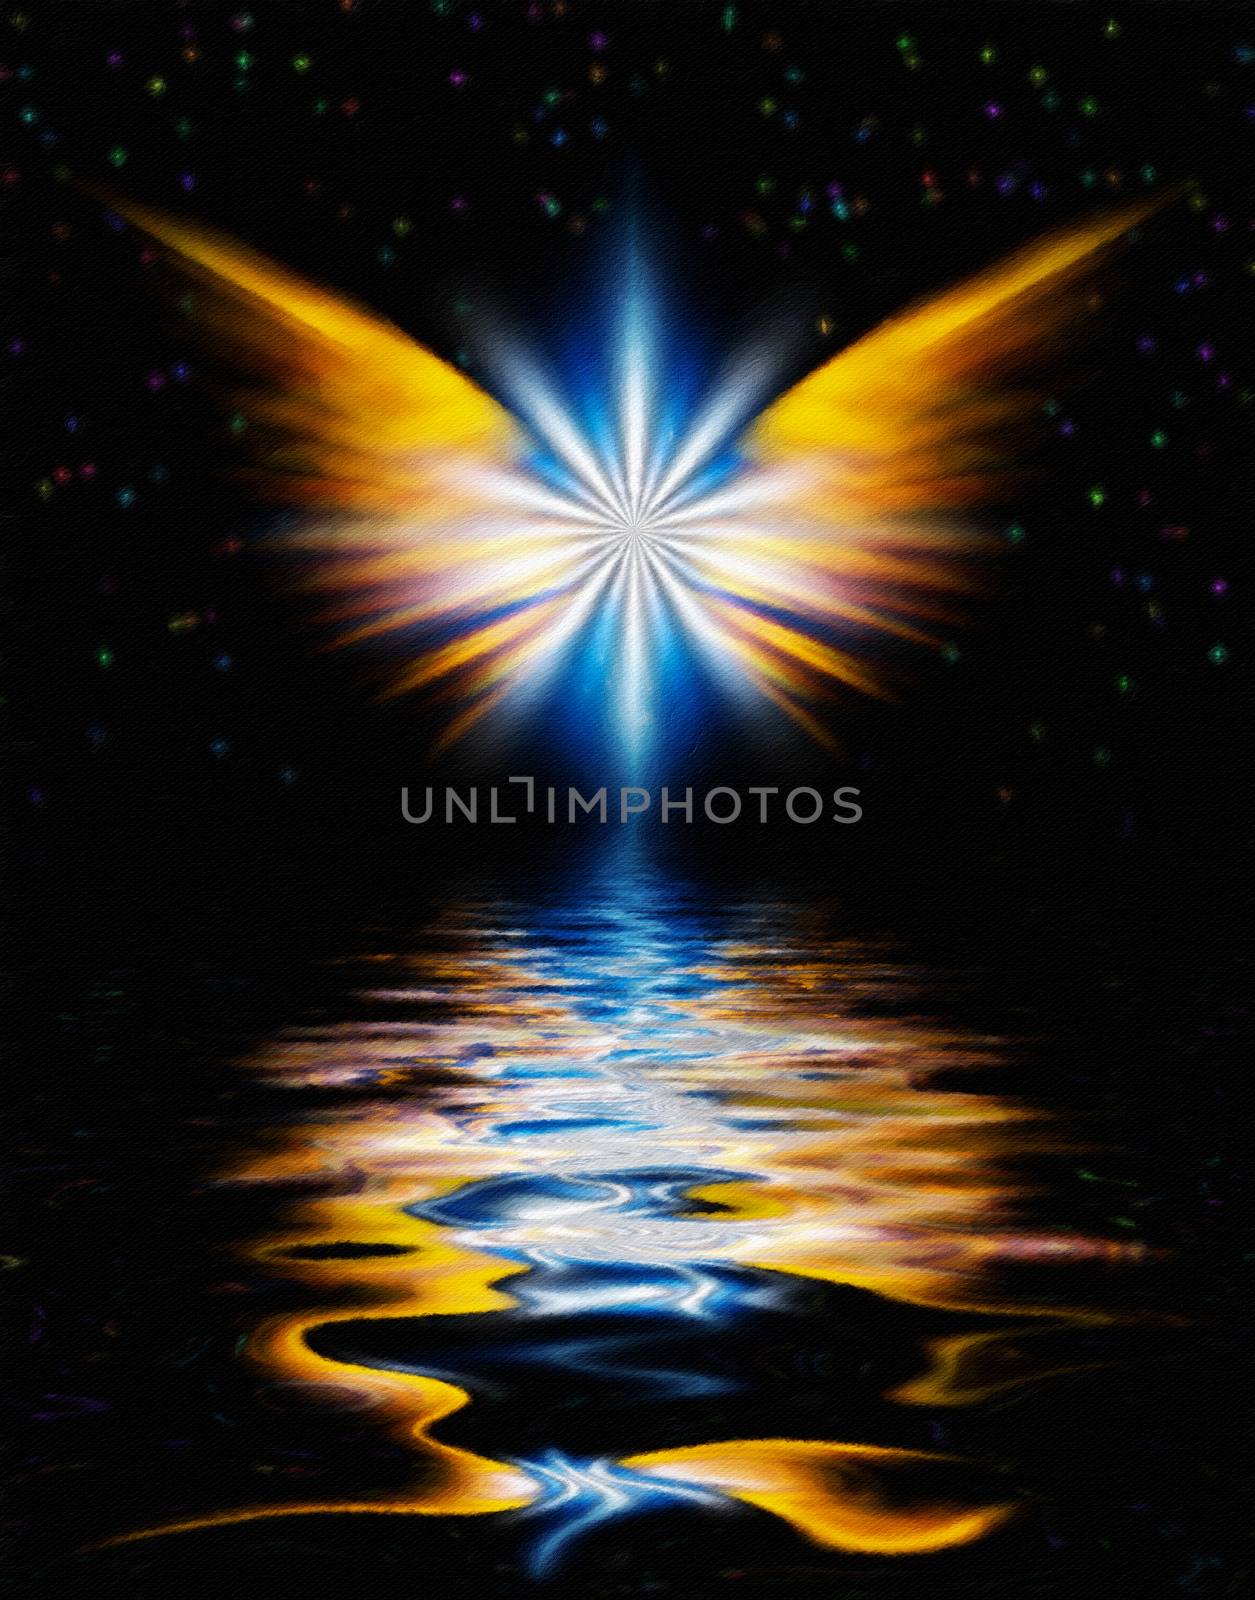 Oil painting on canvas. Shining Angel Wings above water surface.